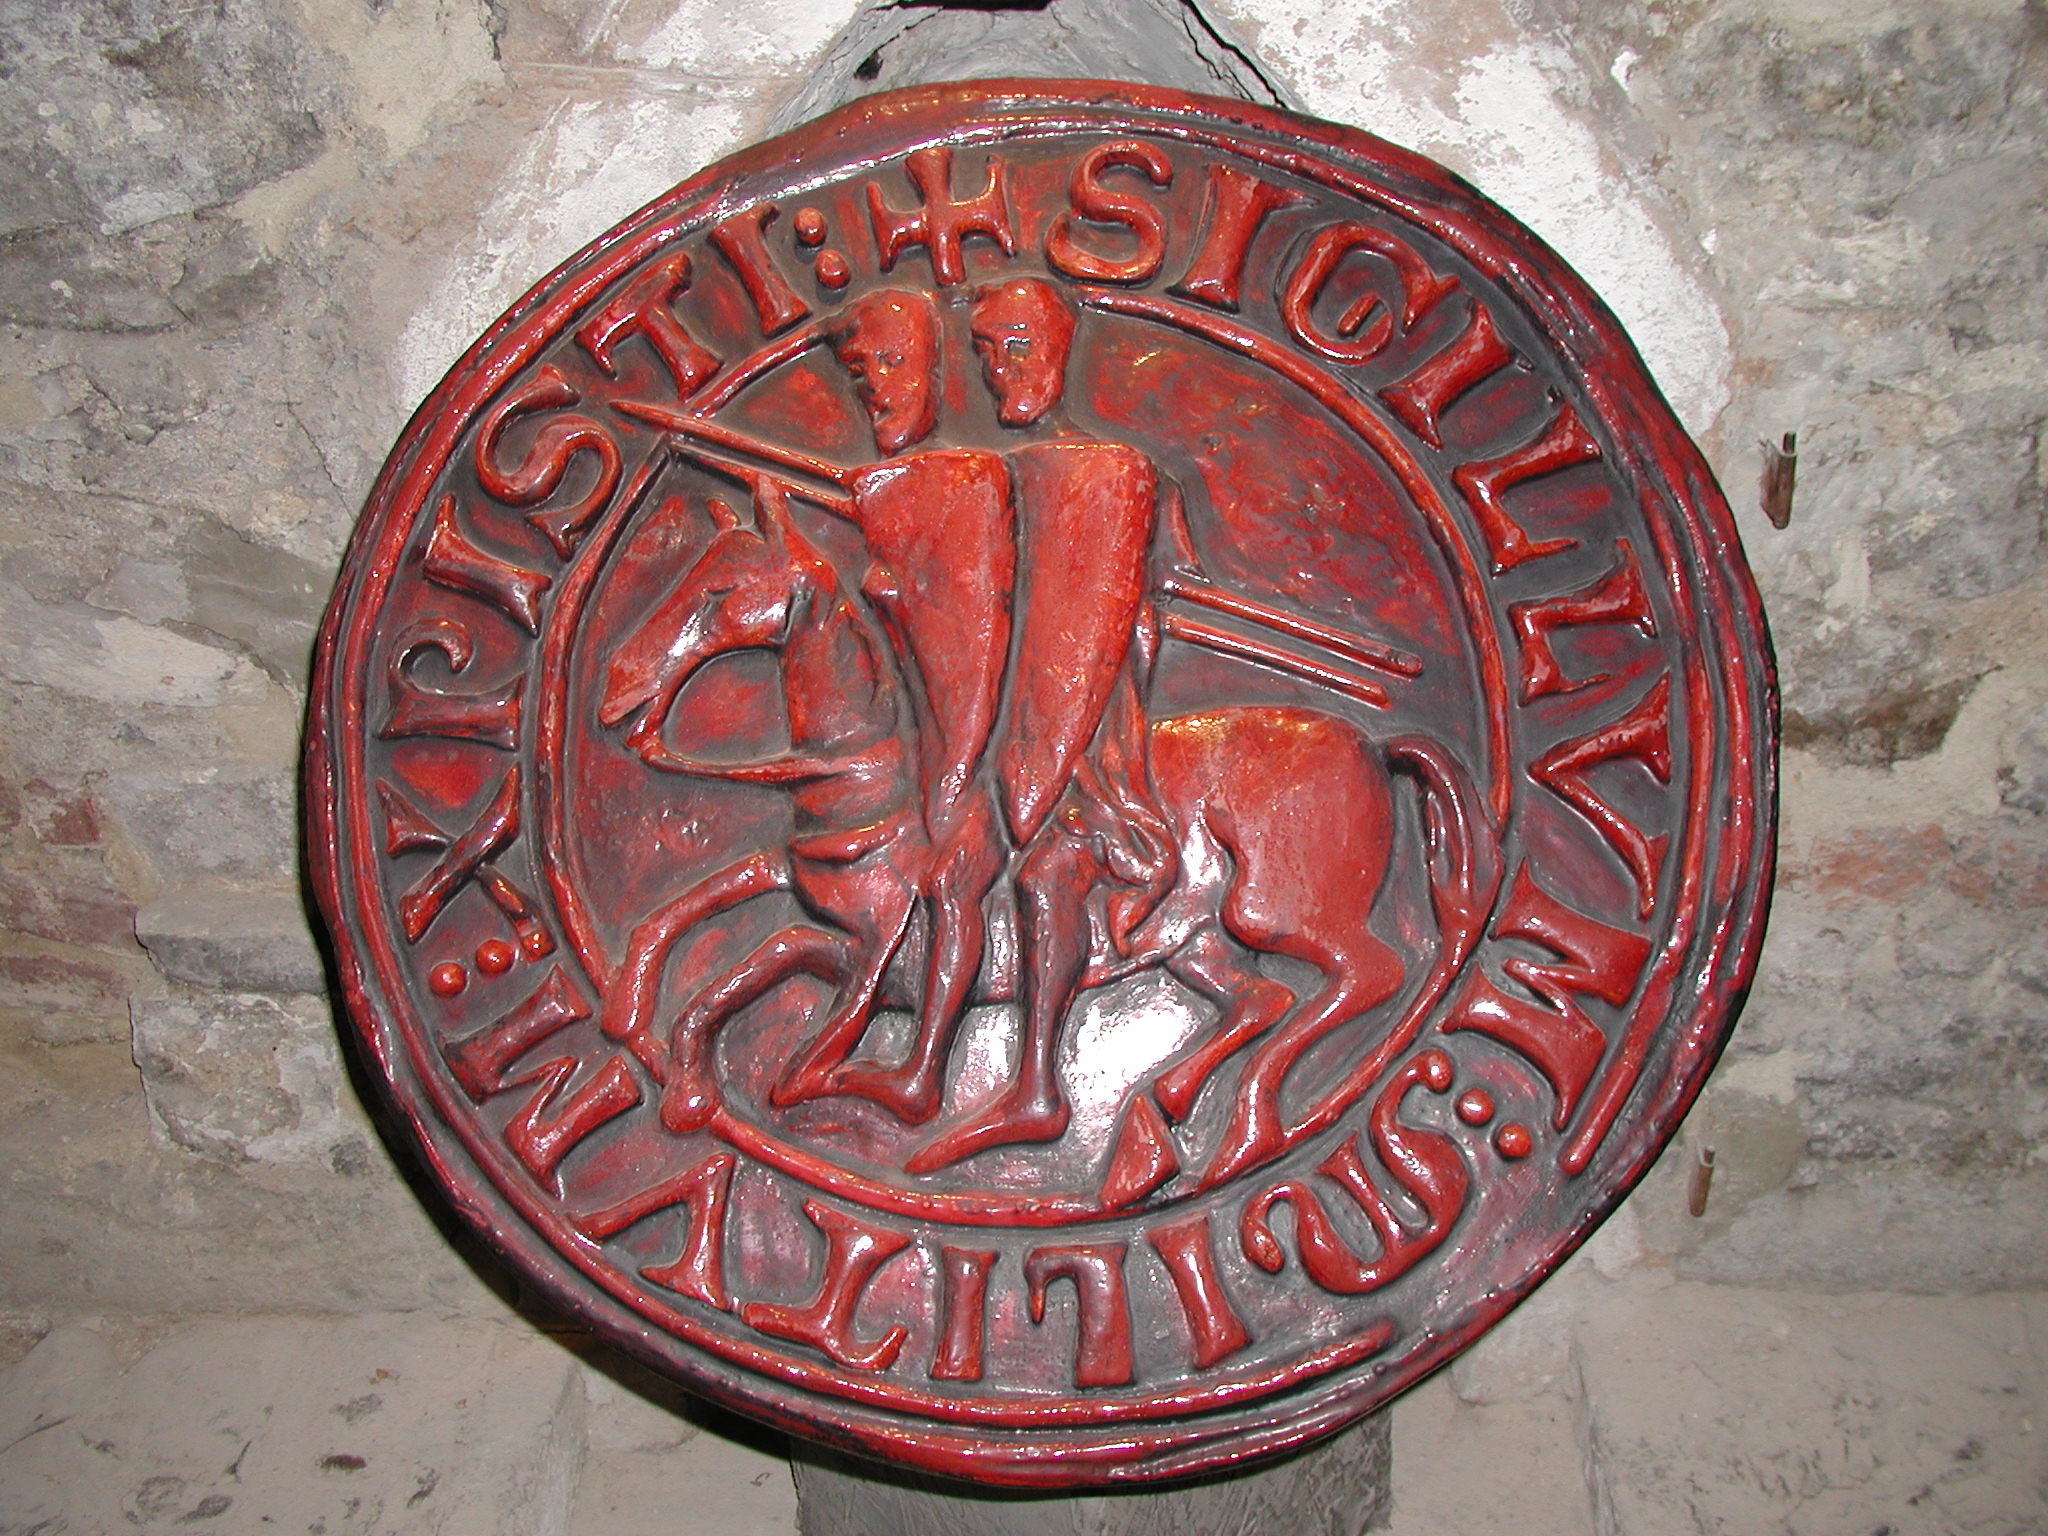 Copy of a seal of the Knights Templar in an exhibition in Prague.